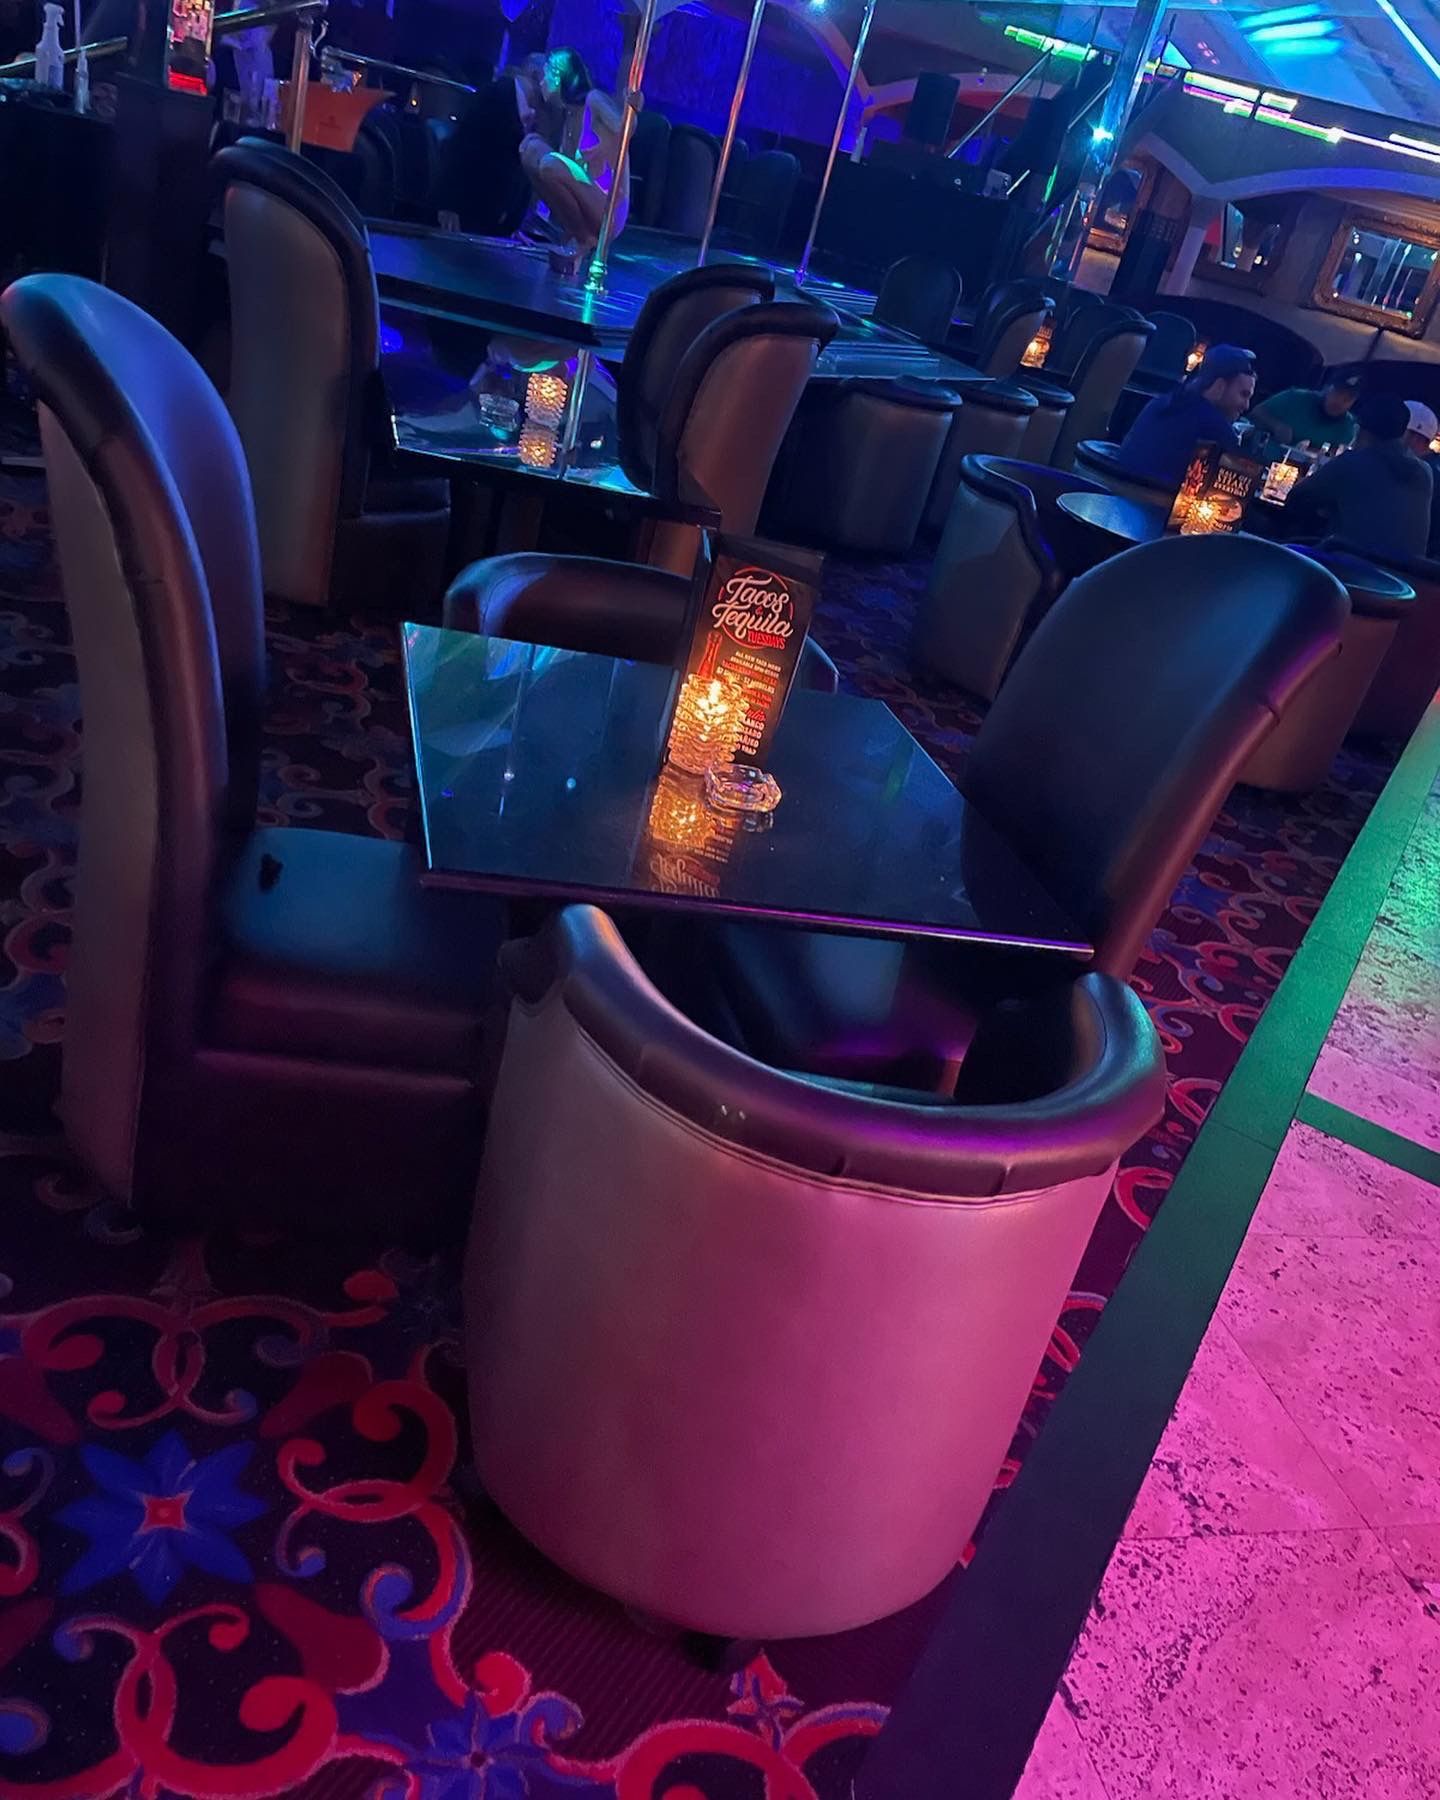 tables with dining parlor chairs around them in a nightclub